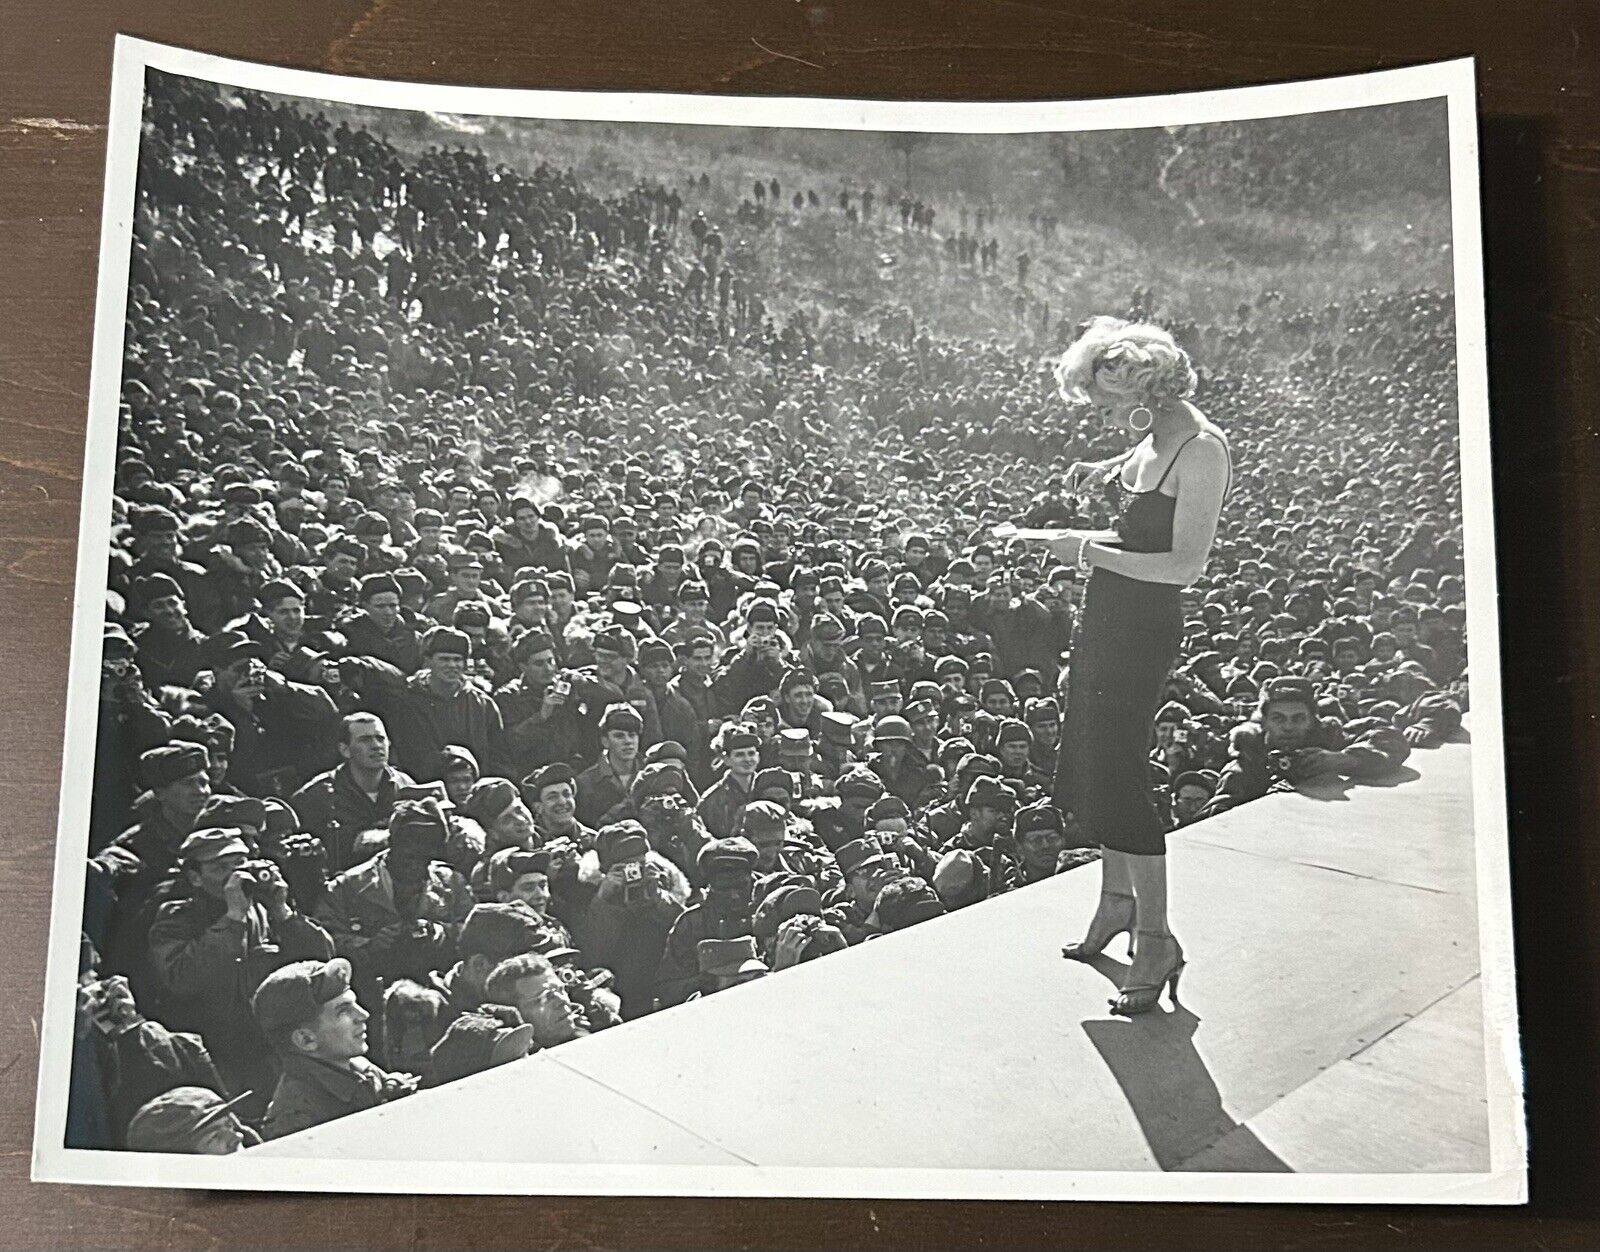 February 1954 Marilyn Monroe Our Troops In Korea US Army Photo “Original”